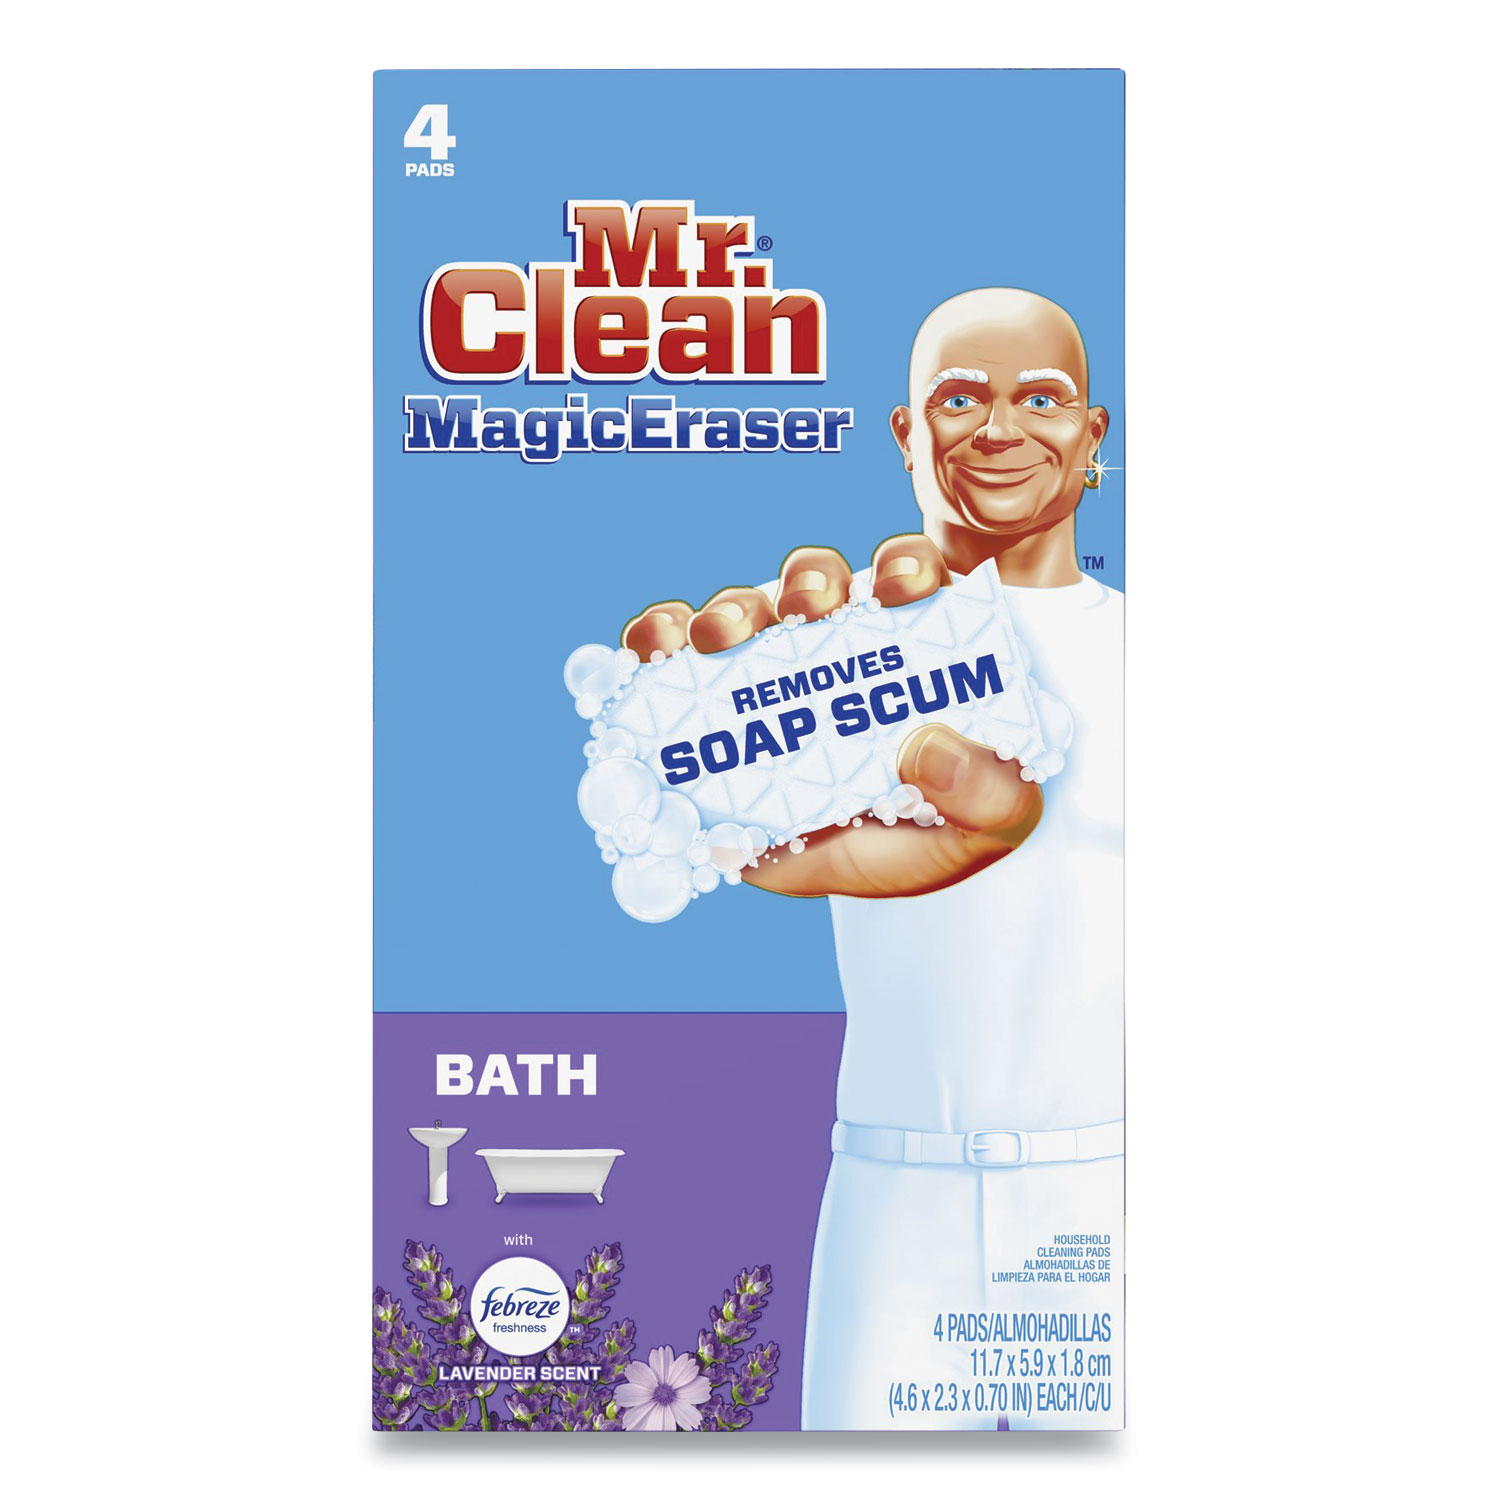 Mr. Clean Tile and Grout Brush